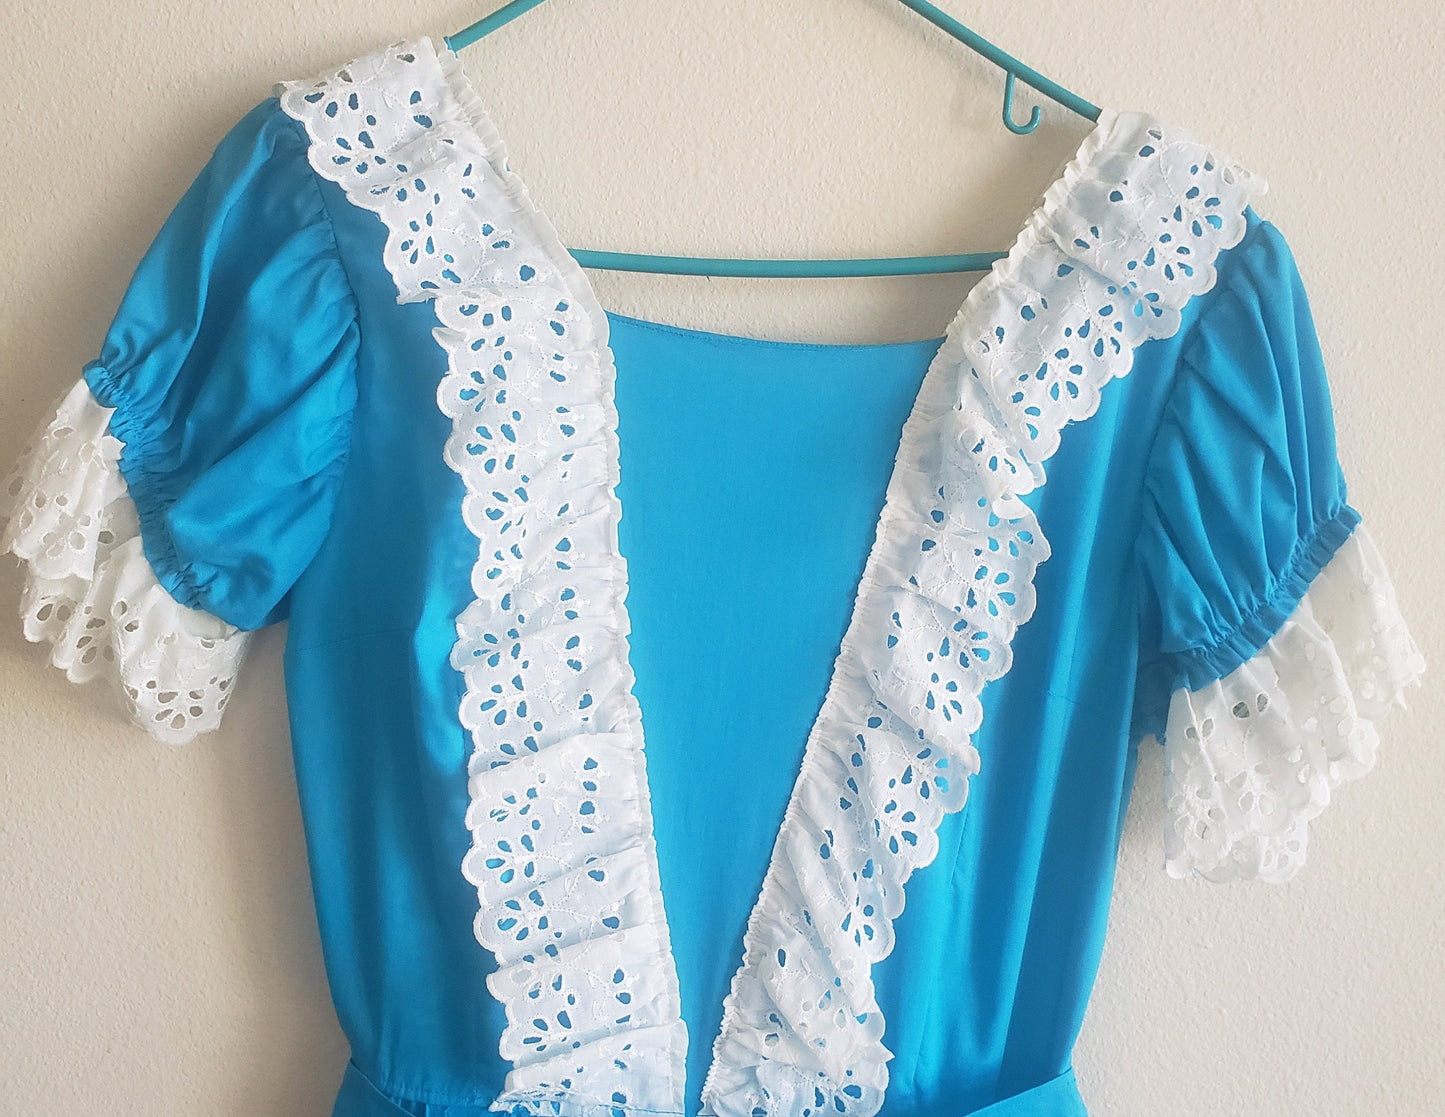 Vintage 70's Prairie Dress in Cyan and Eyelet Lace